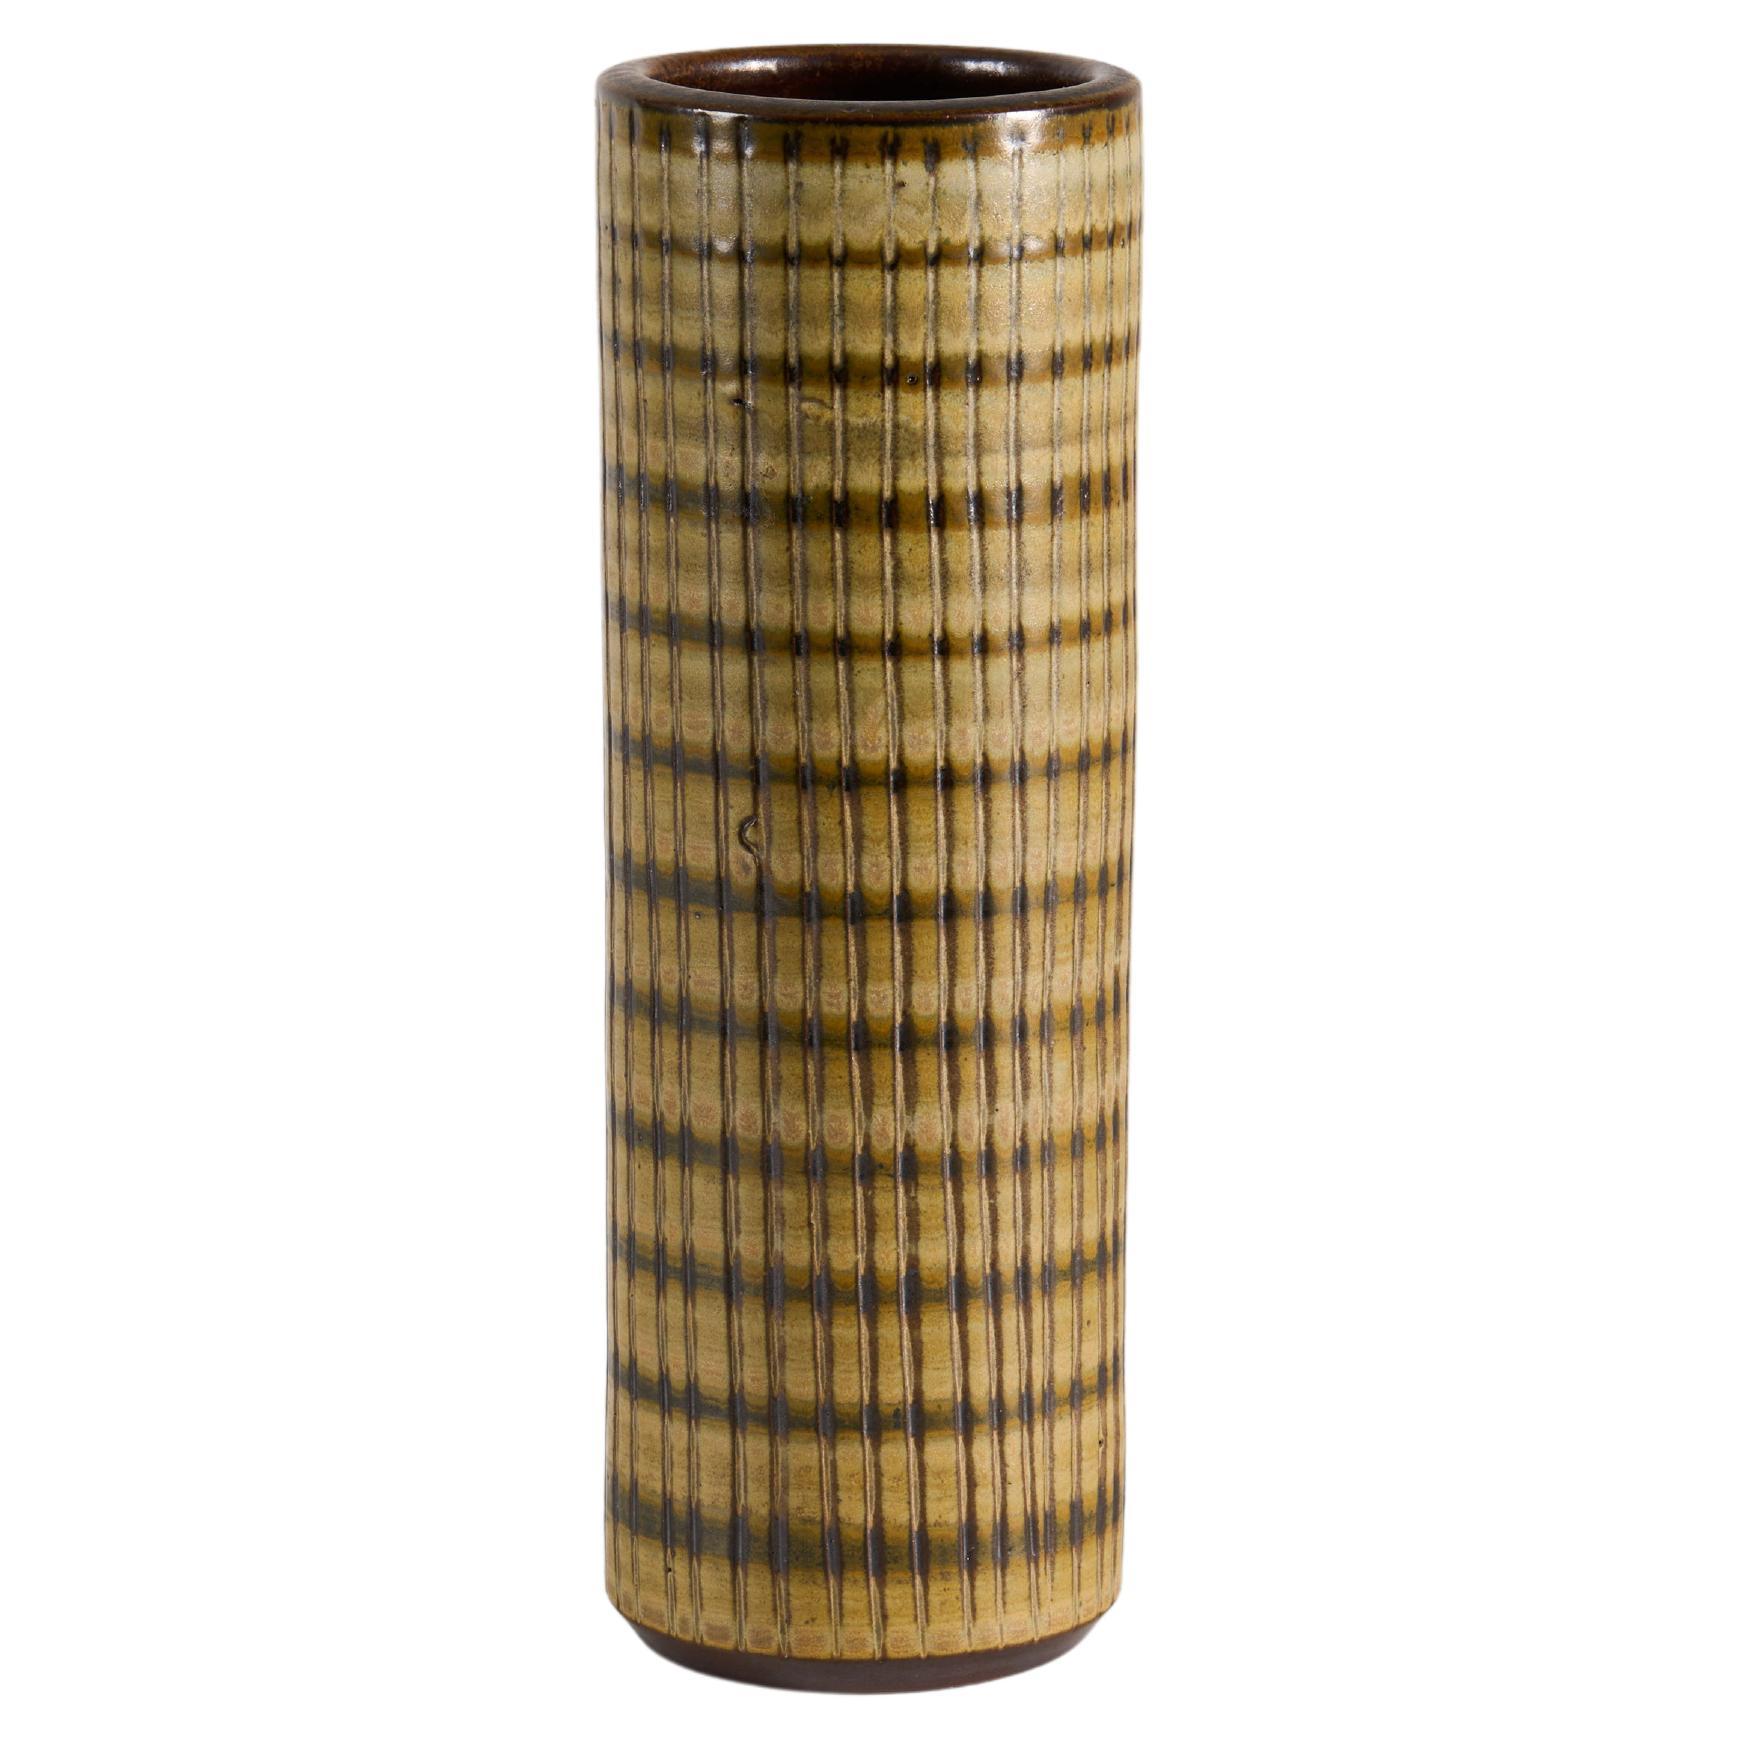 Cylindrical Ceramic Vase with Earth-Toned Glaze, Wallåkra, Sweden, 1960s For Sale